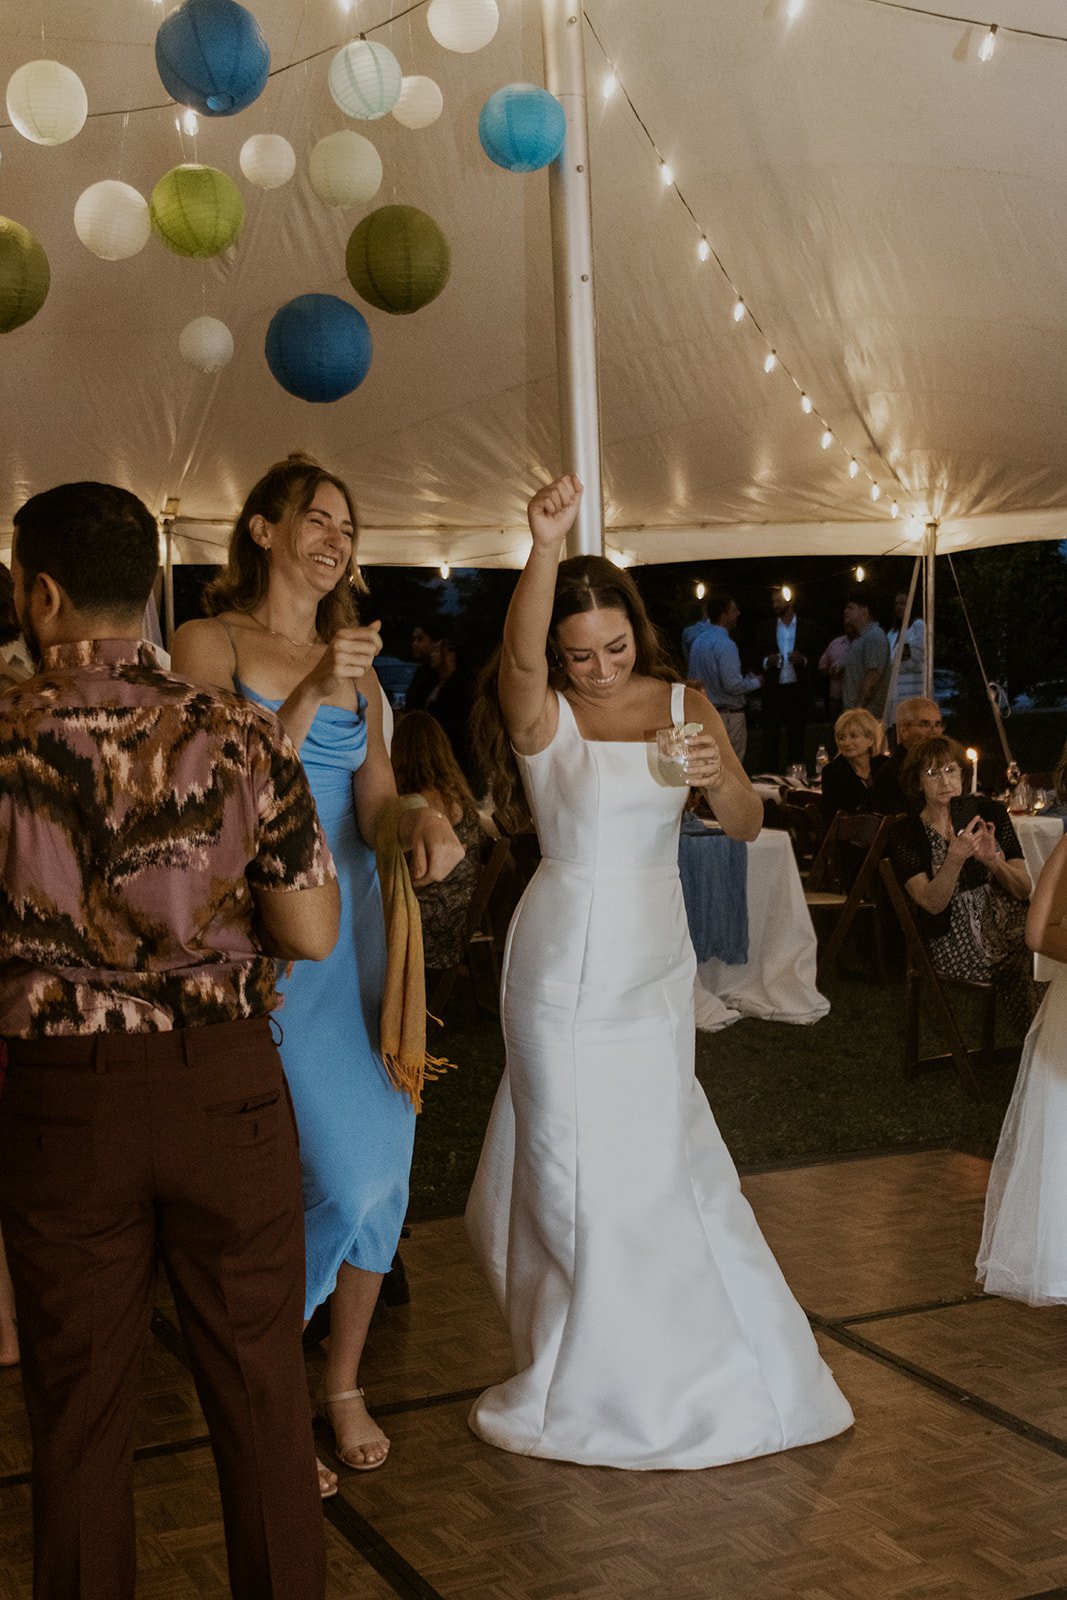 The bride dances happily with a few of her wedding guests.